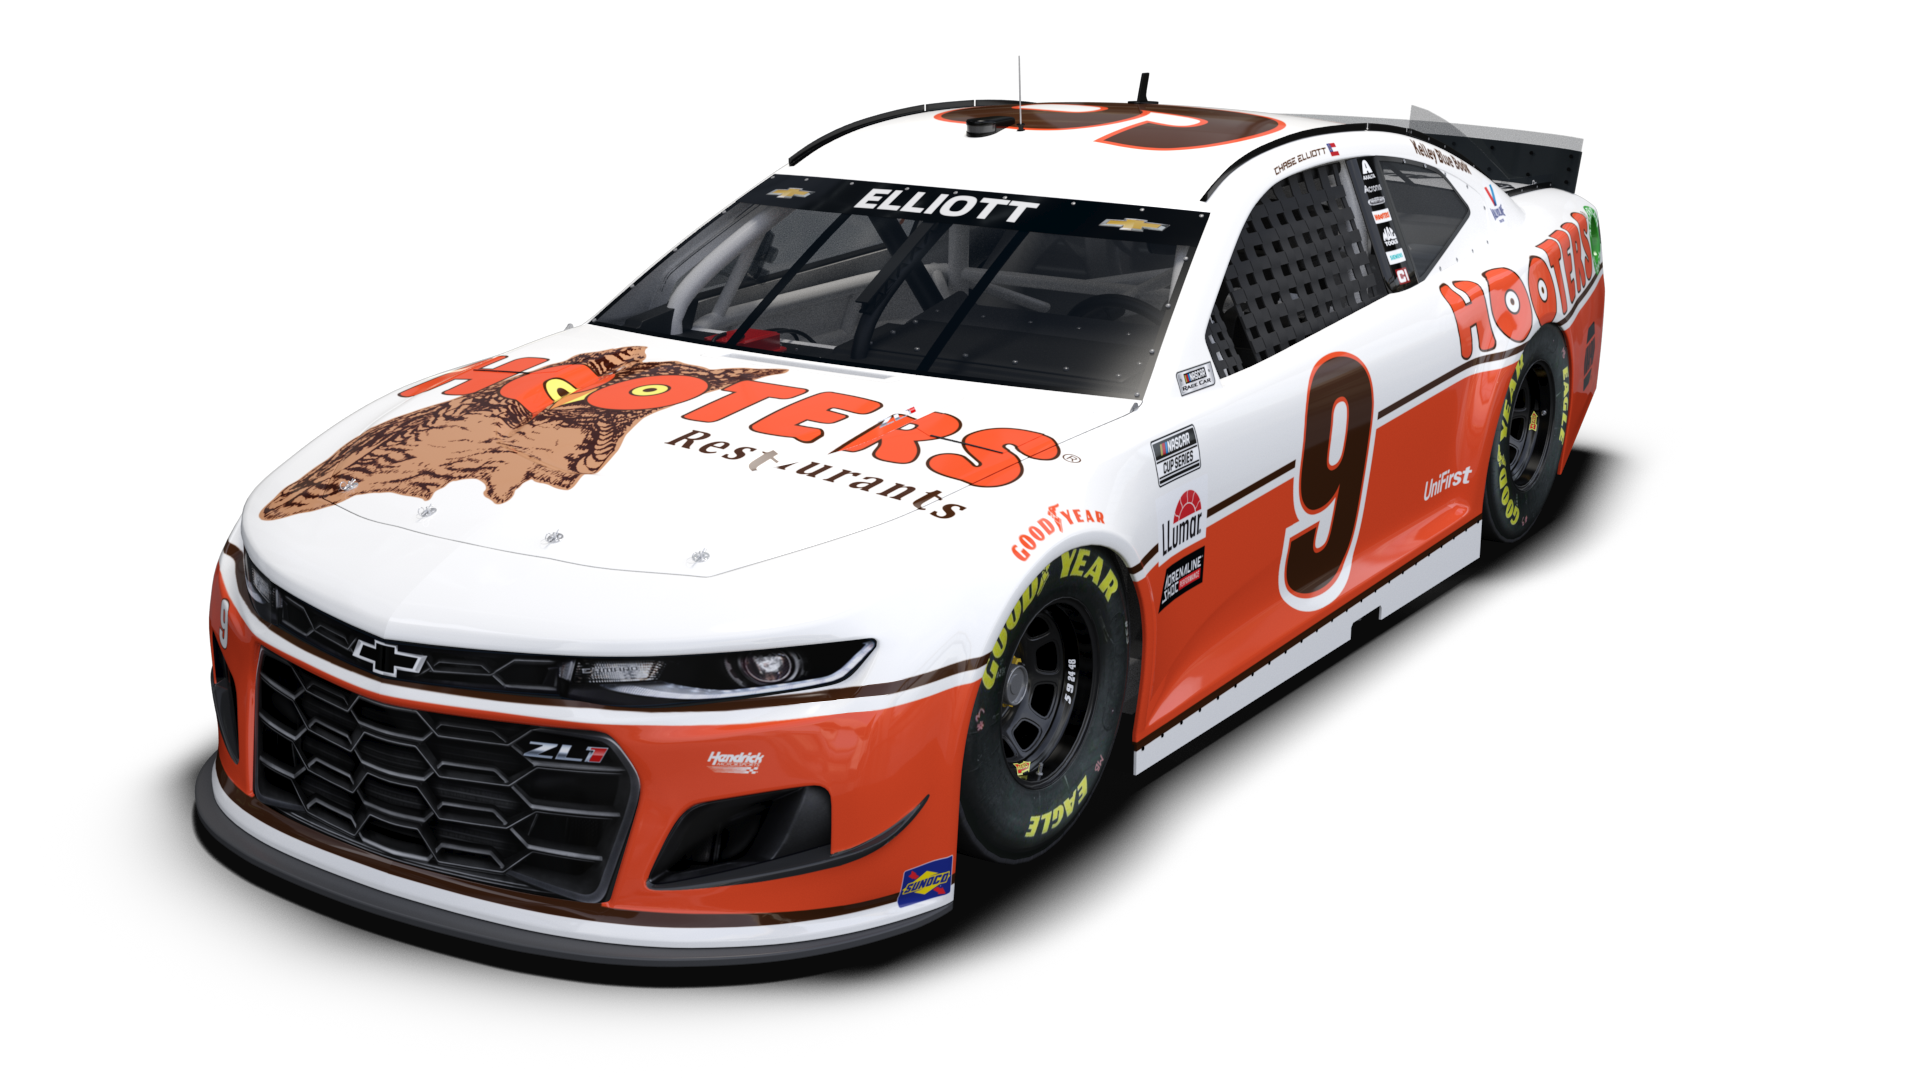 No Hooters Scheme For Darlington Throwback Race Unveiled